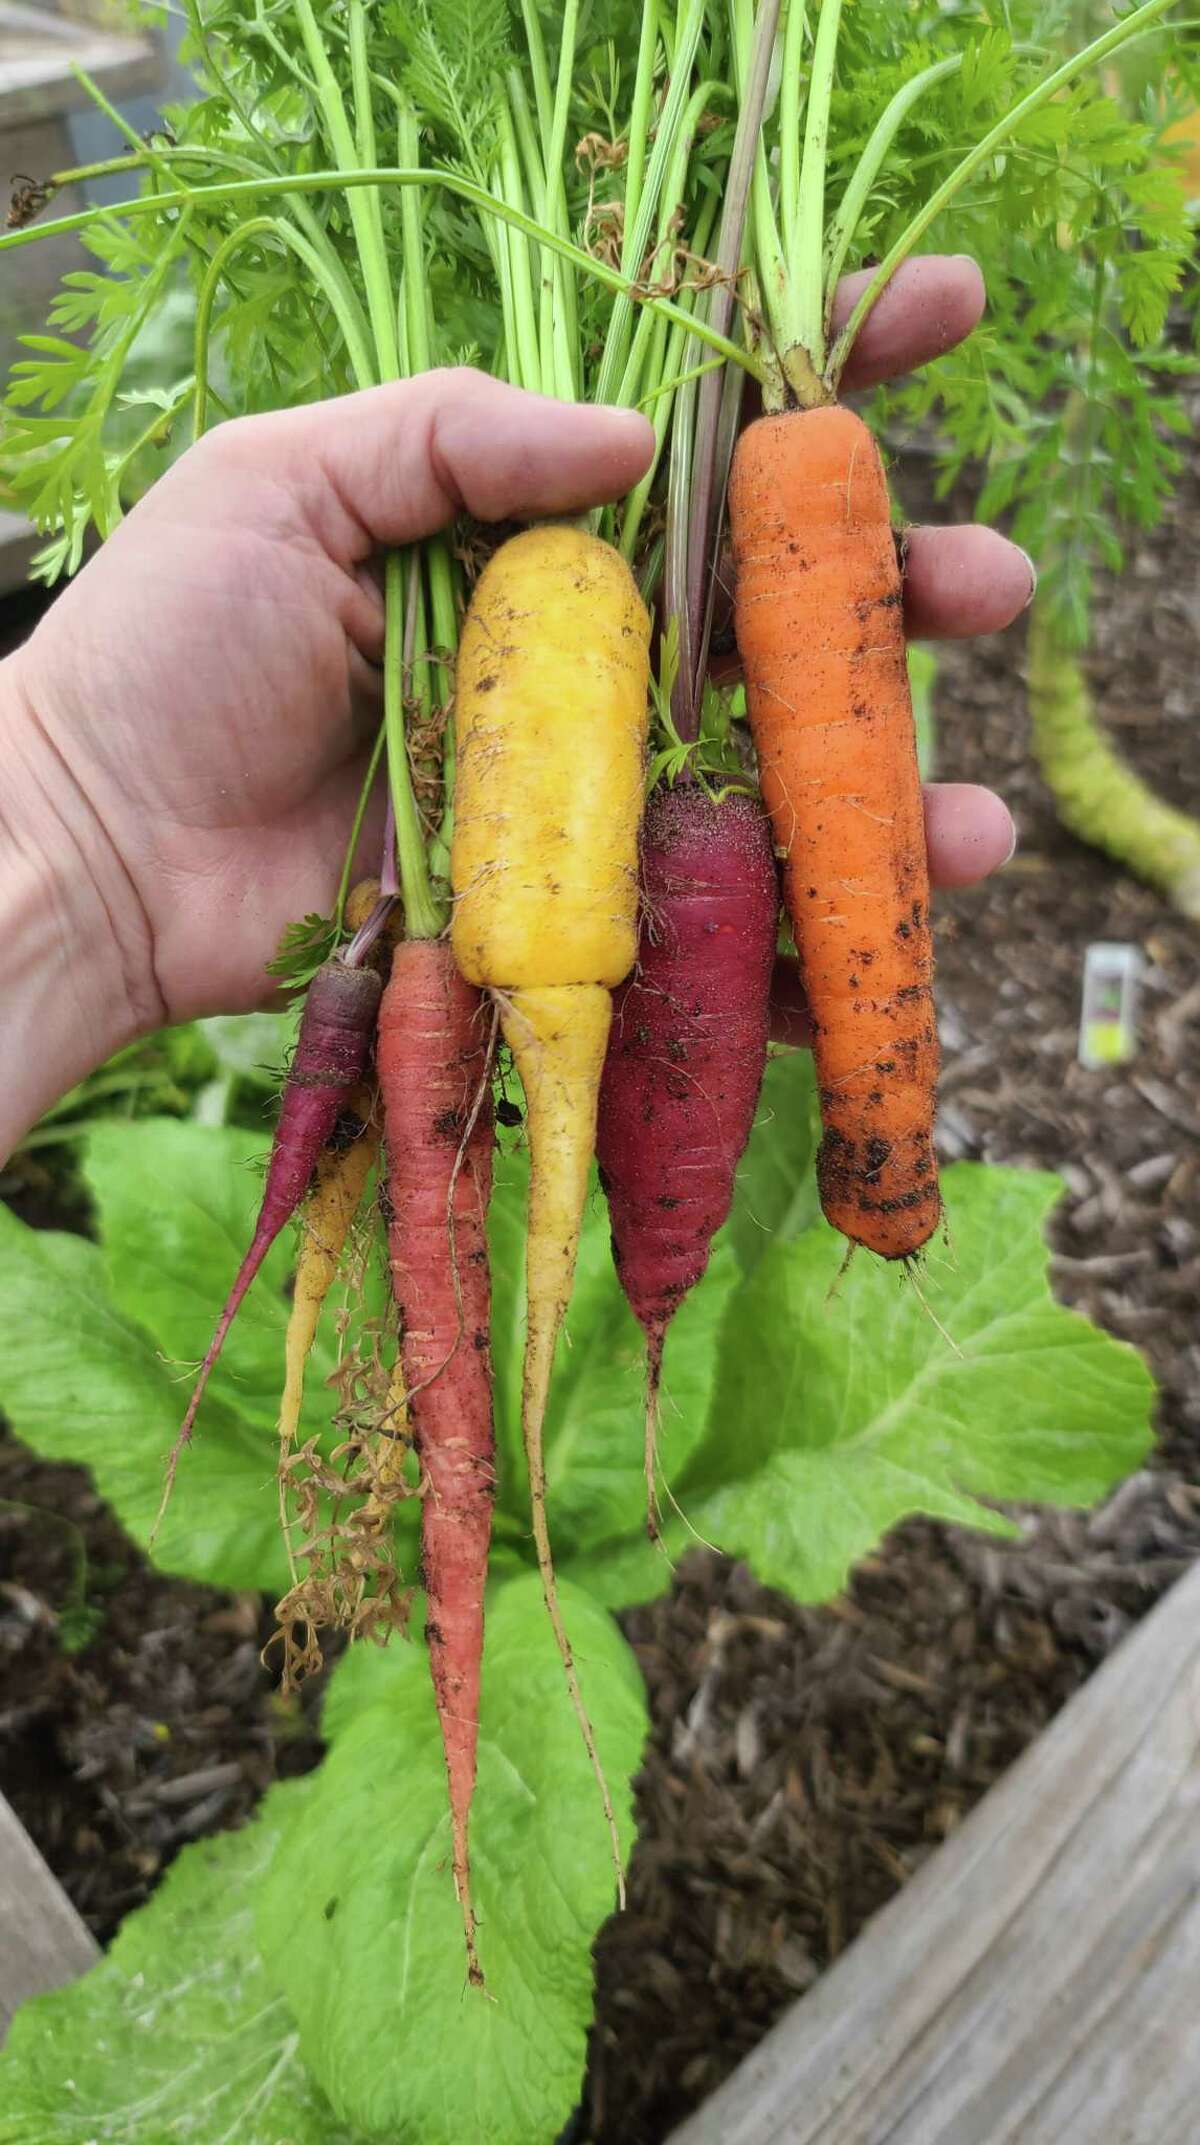 Last week’s carrot harvest will give way to the next season’s harvest. Remember to freeze the carrot greens to include in vegetable stock.